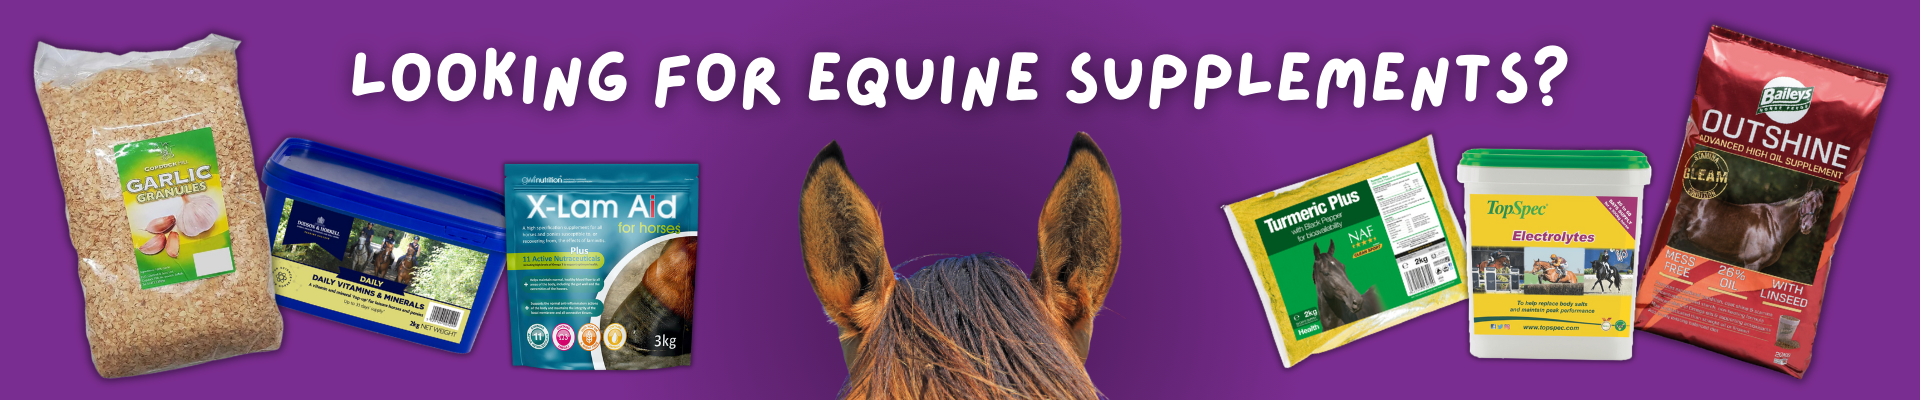 Looking for equine Supplements